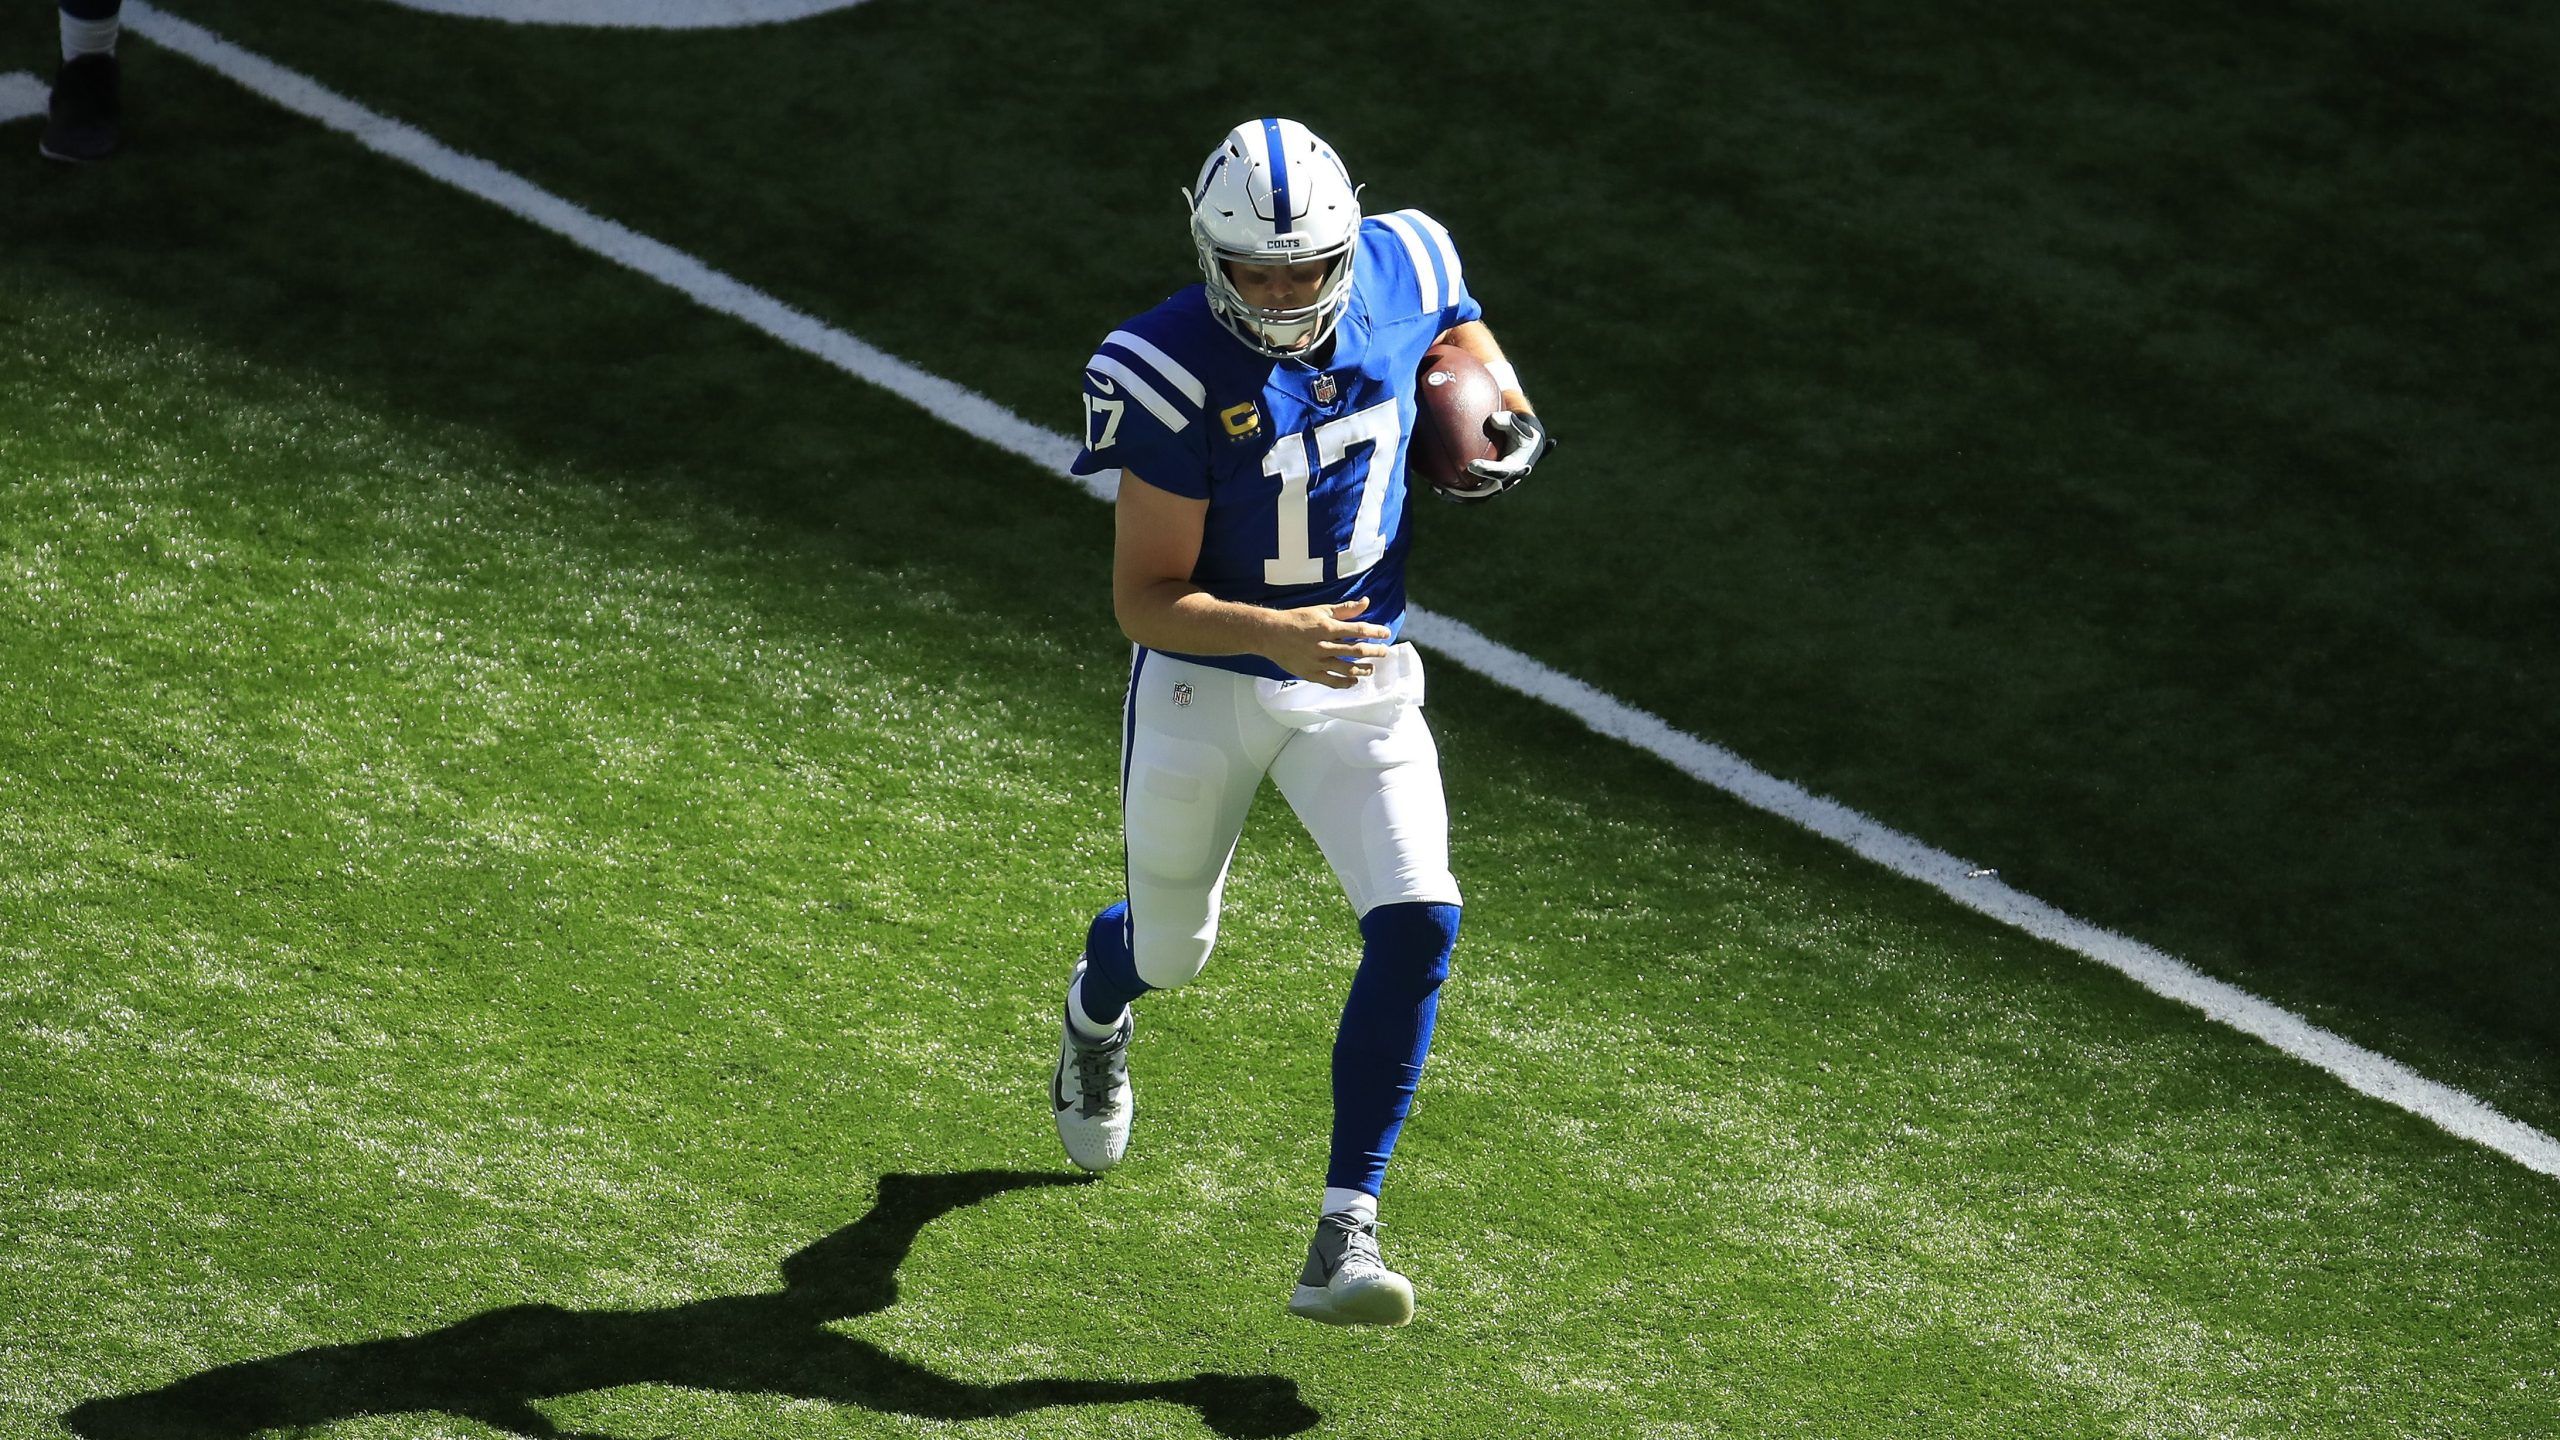 Philip Rivers' option in Colts' run game? 'Last'